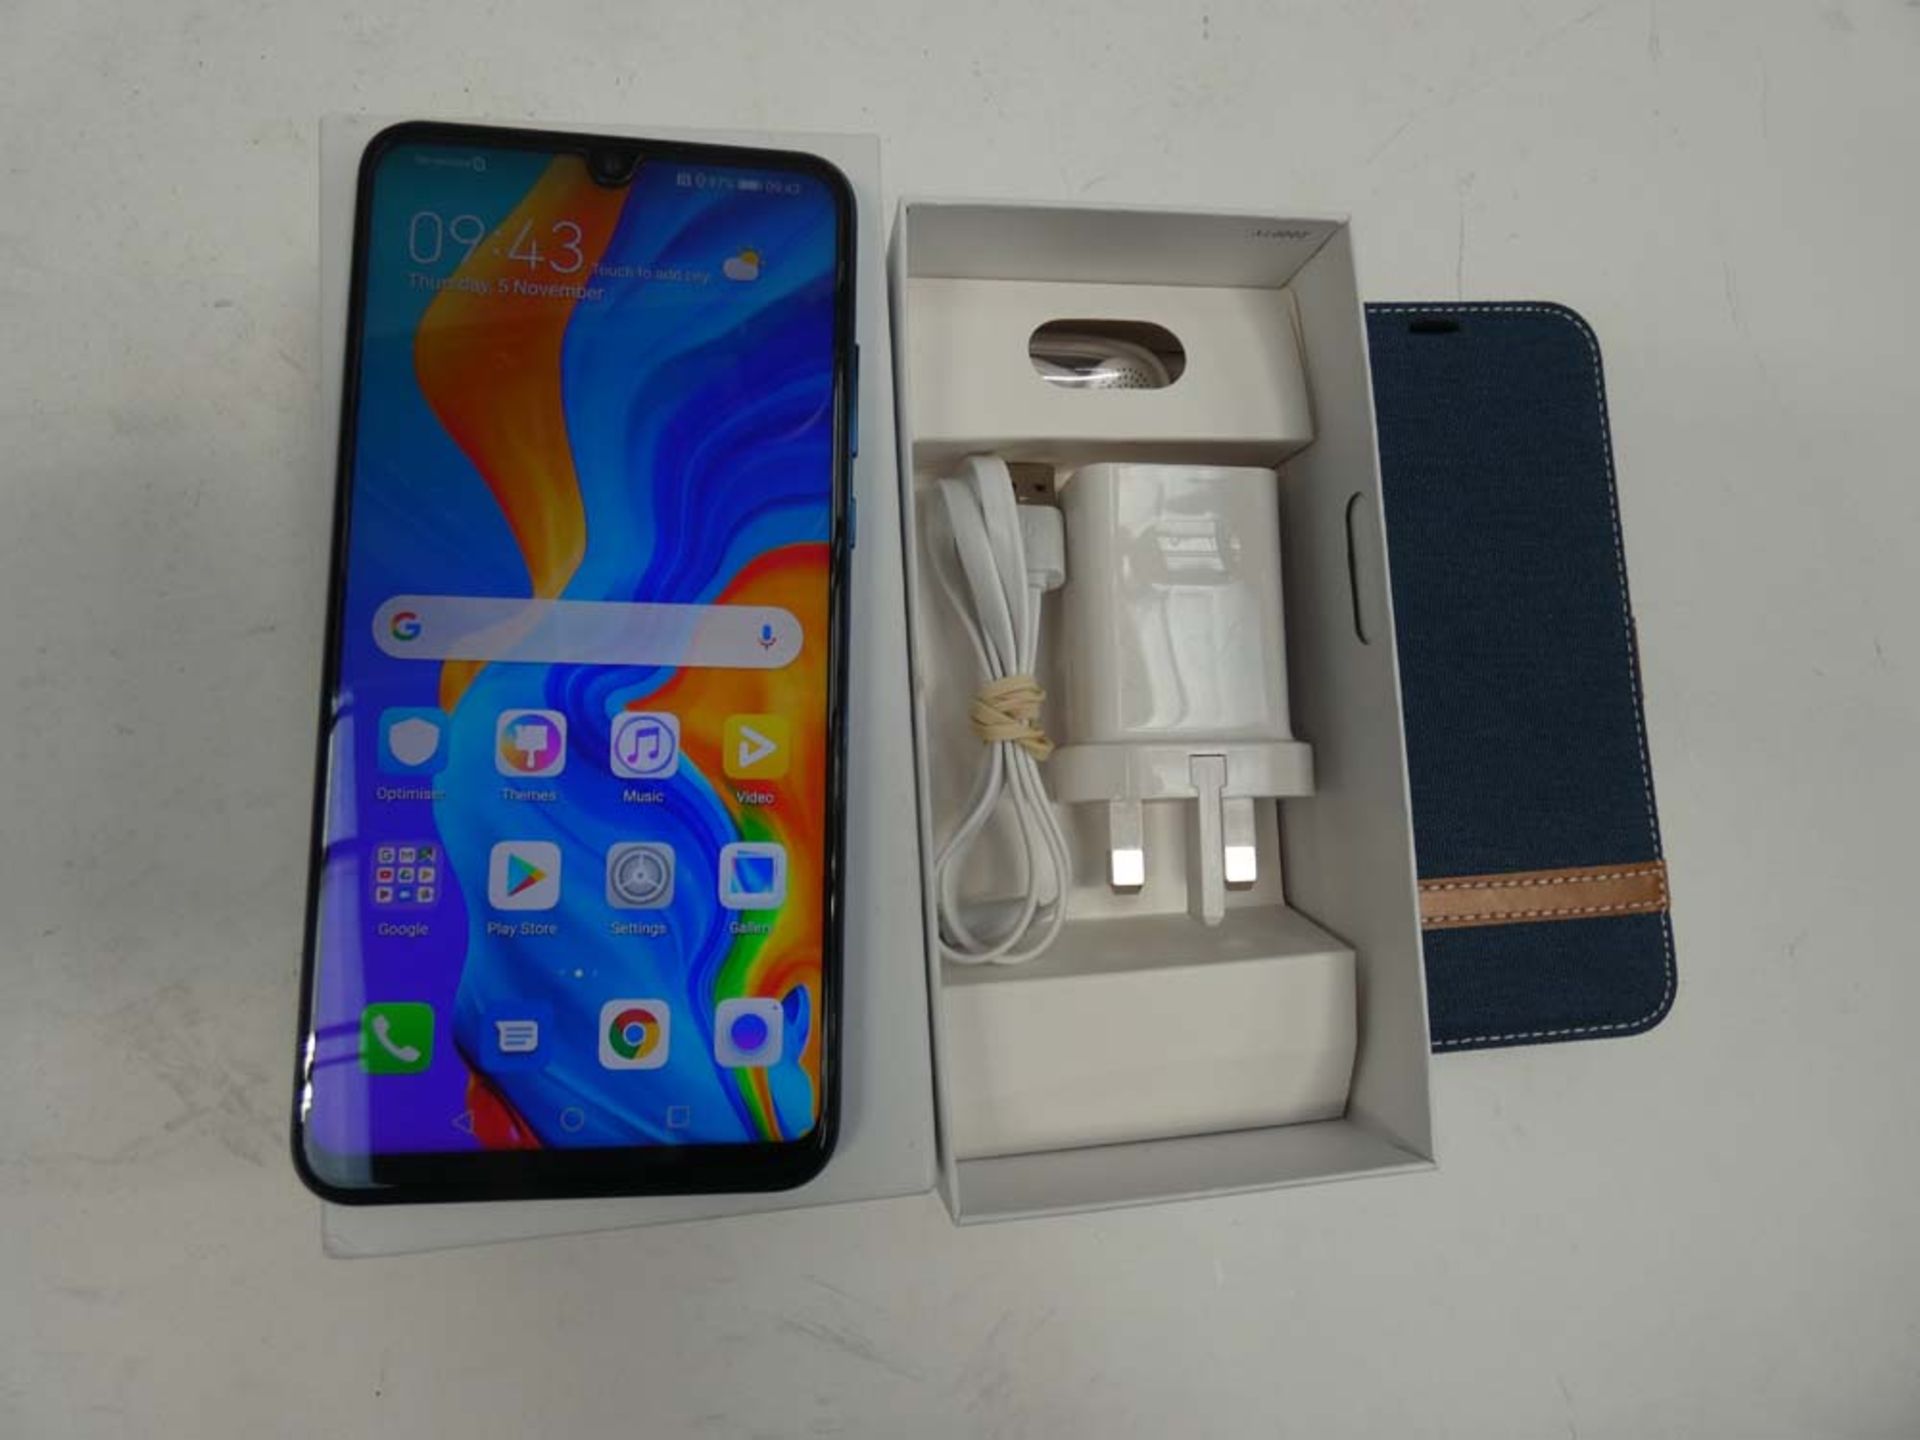 Huawei P30 Lite 128GB smartphone with box, case, charger and earphones